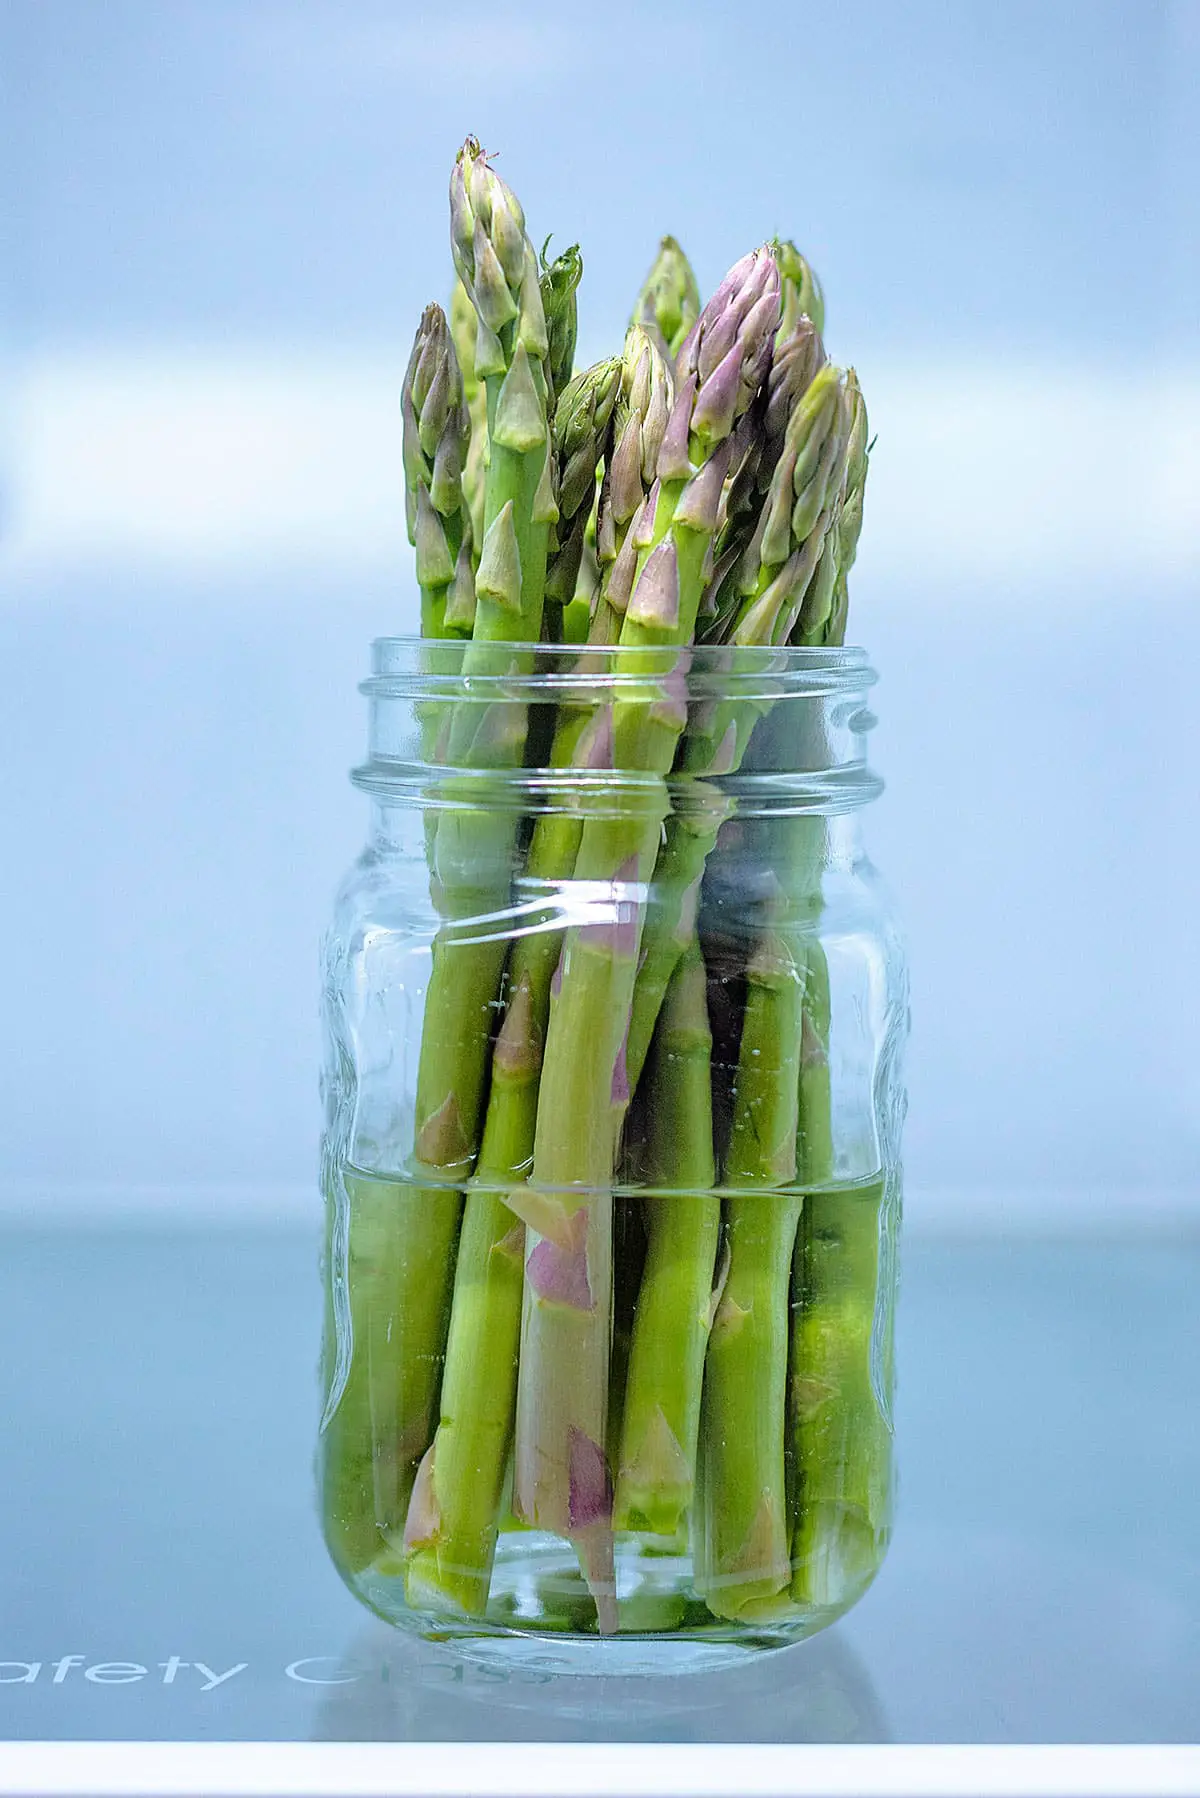 A glass jar half filled with water with asparagus spears stood in it.